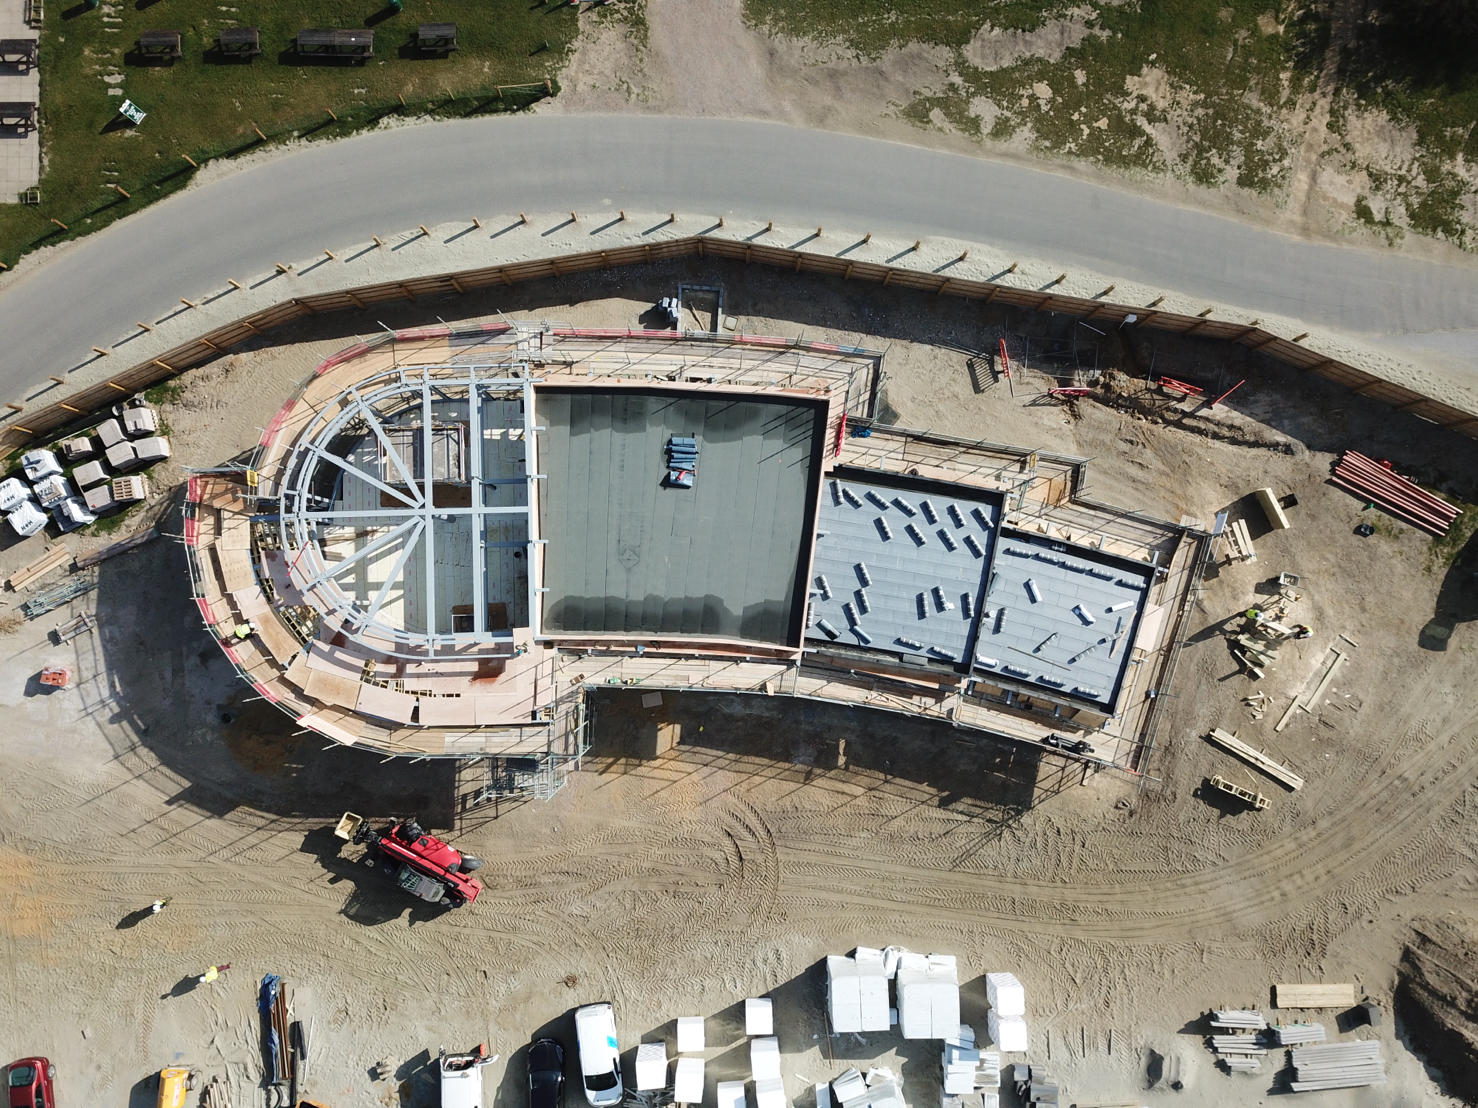 Overhead drone image of the main cafe building